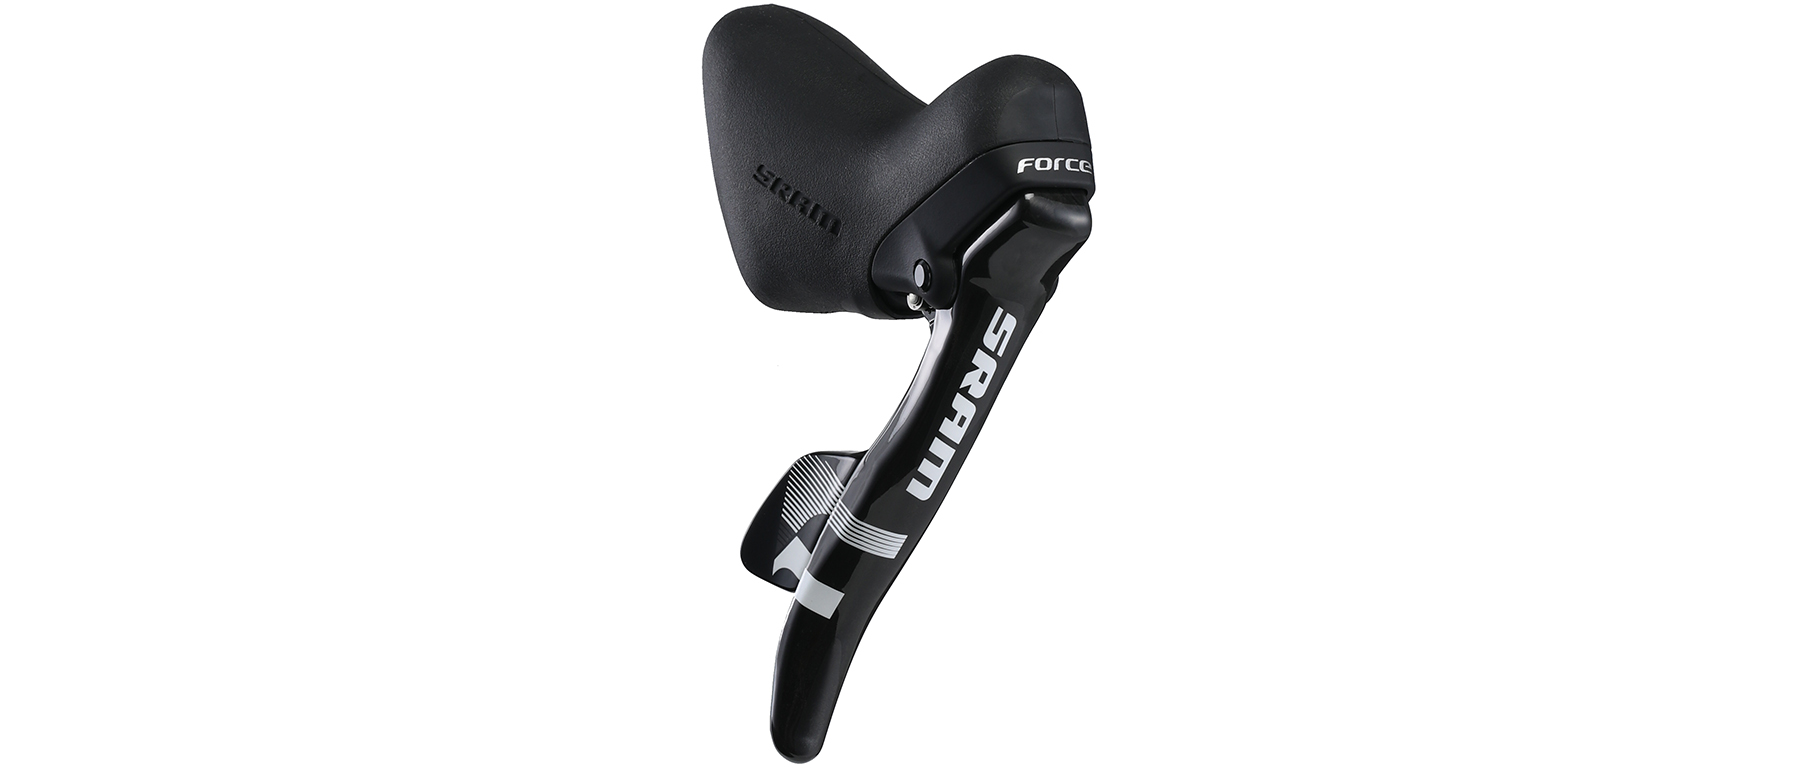 SRAM Force 10 Right Shifter